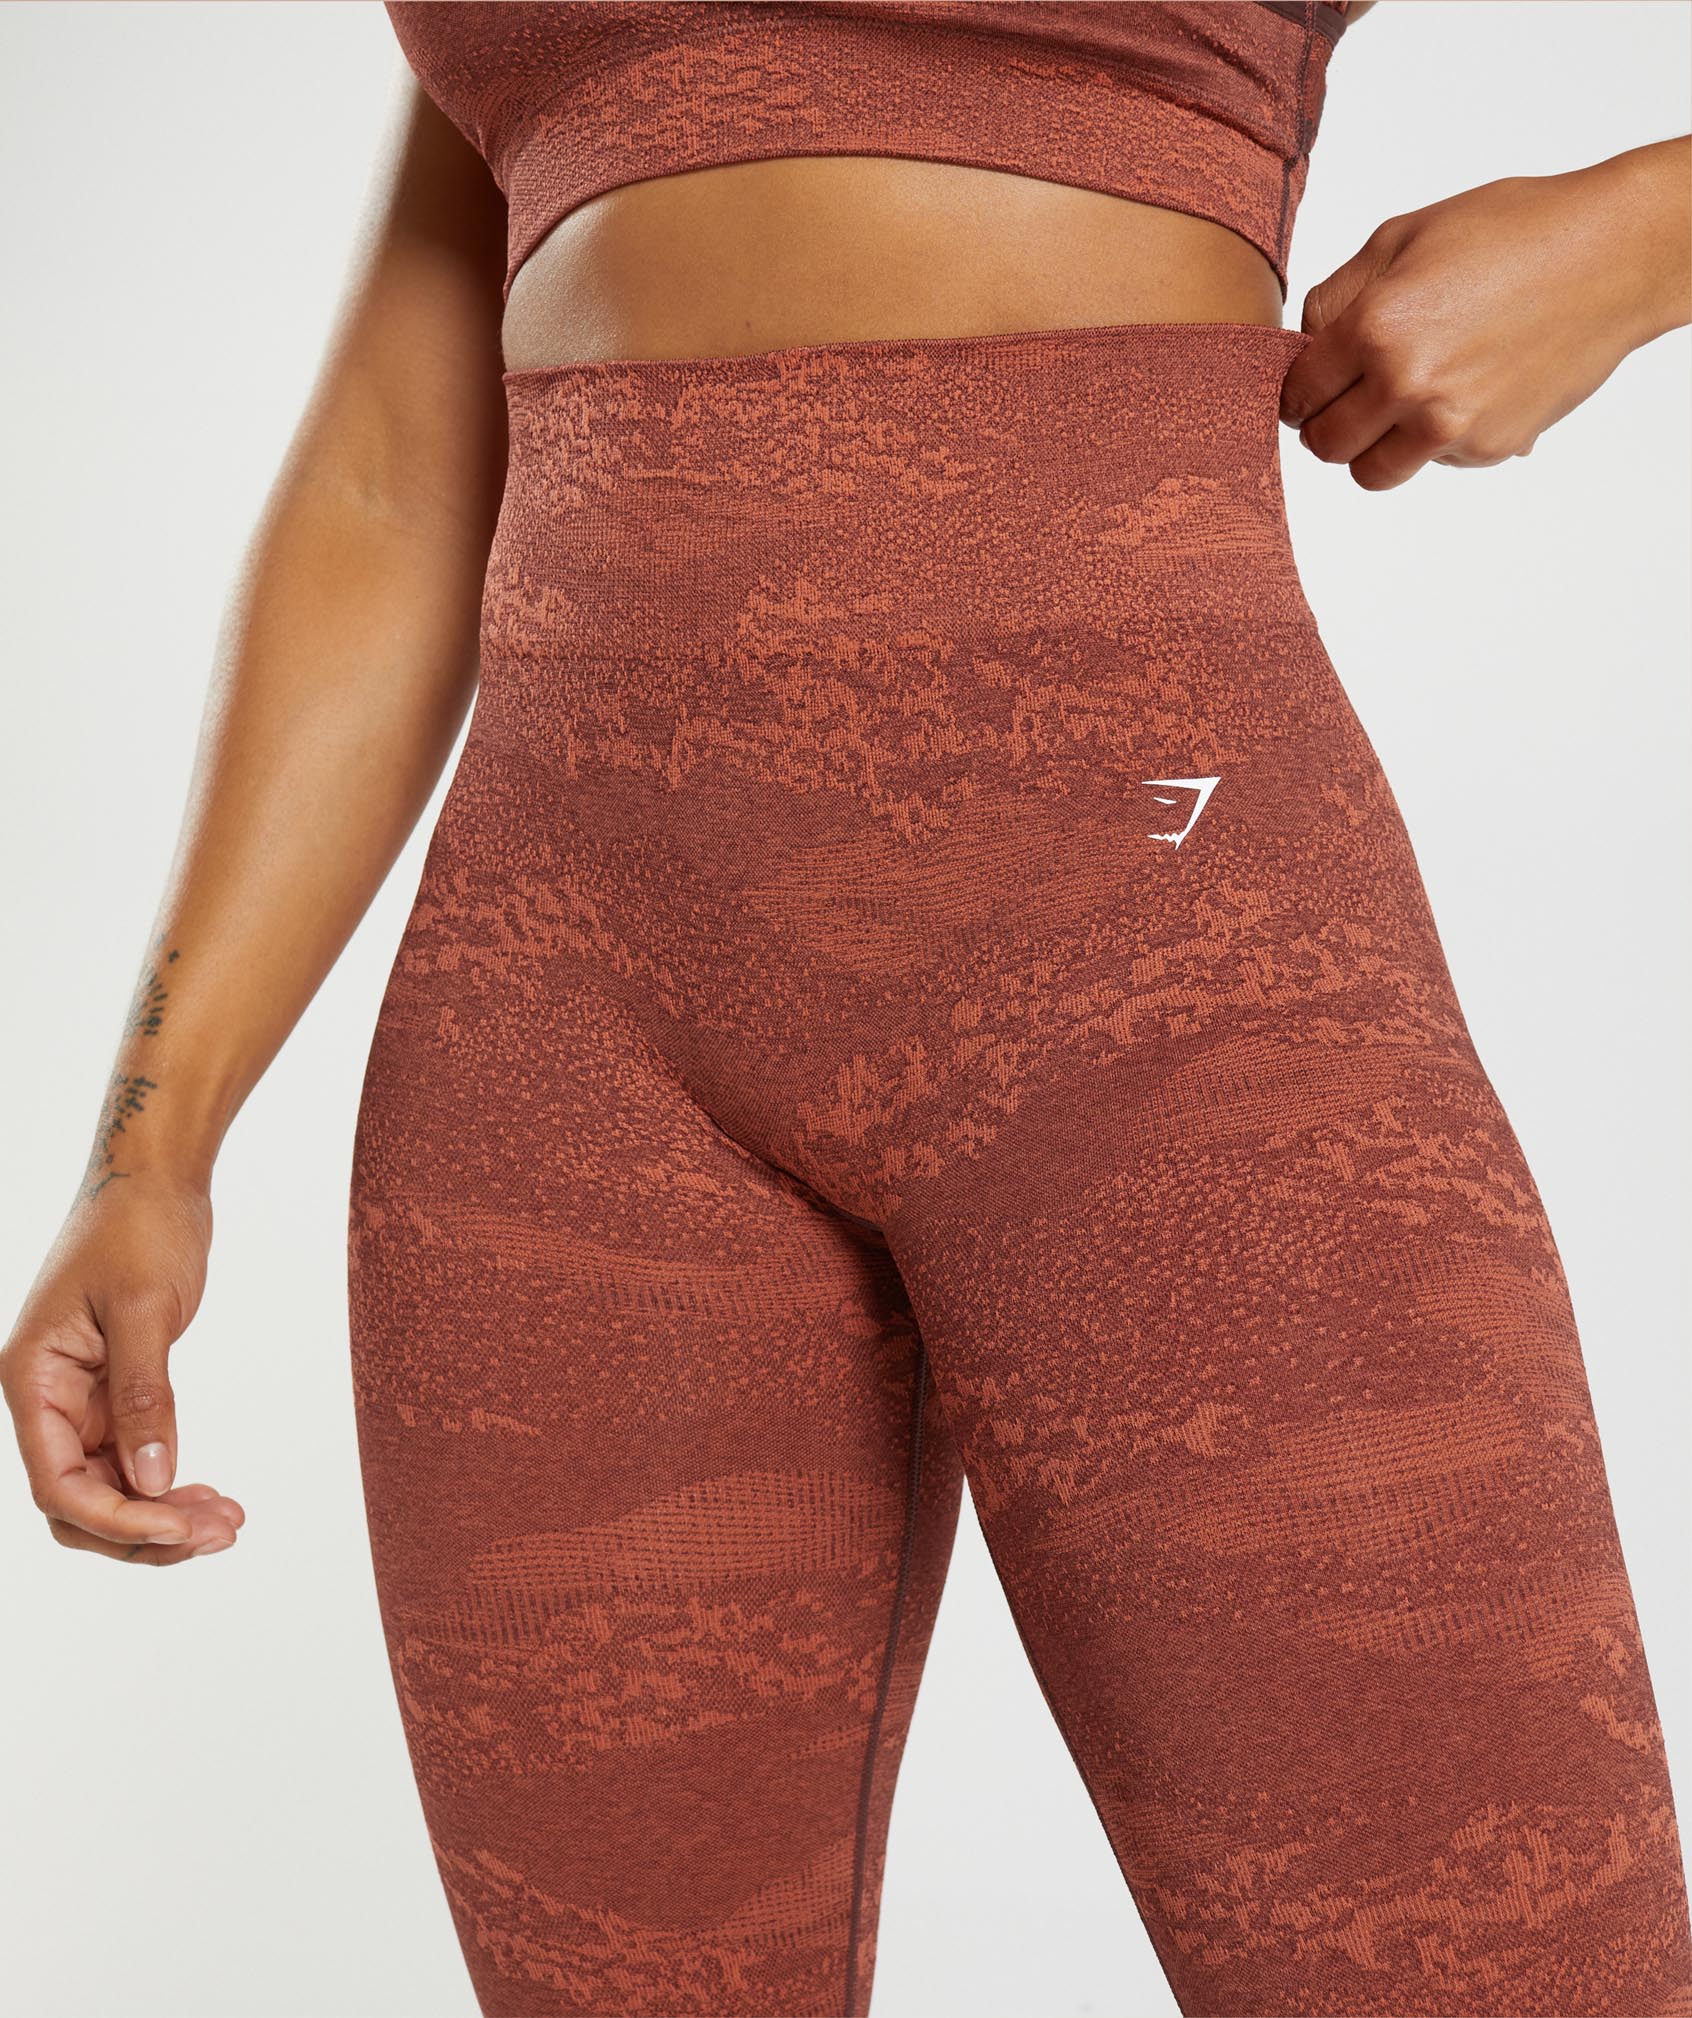 Adapt Camo Seamless Leggings in Storm Red/Cherry Brown